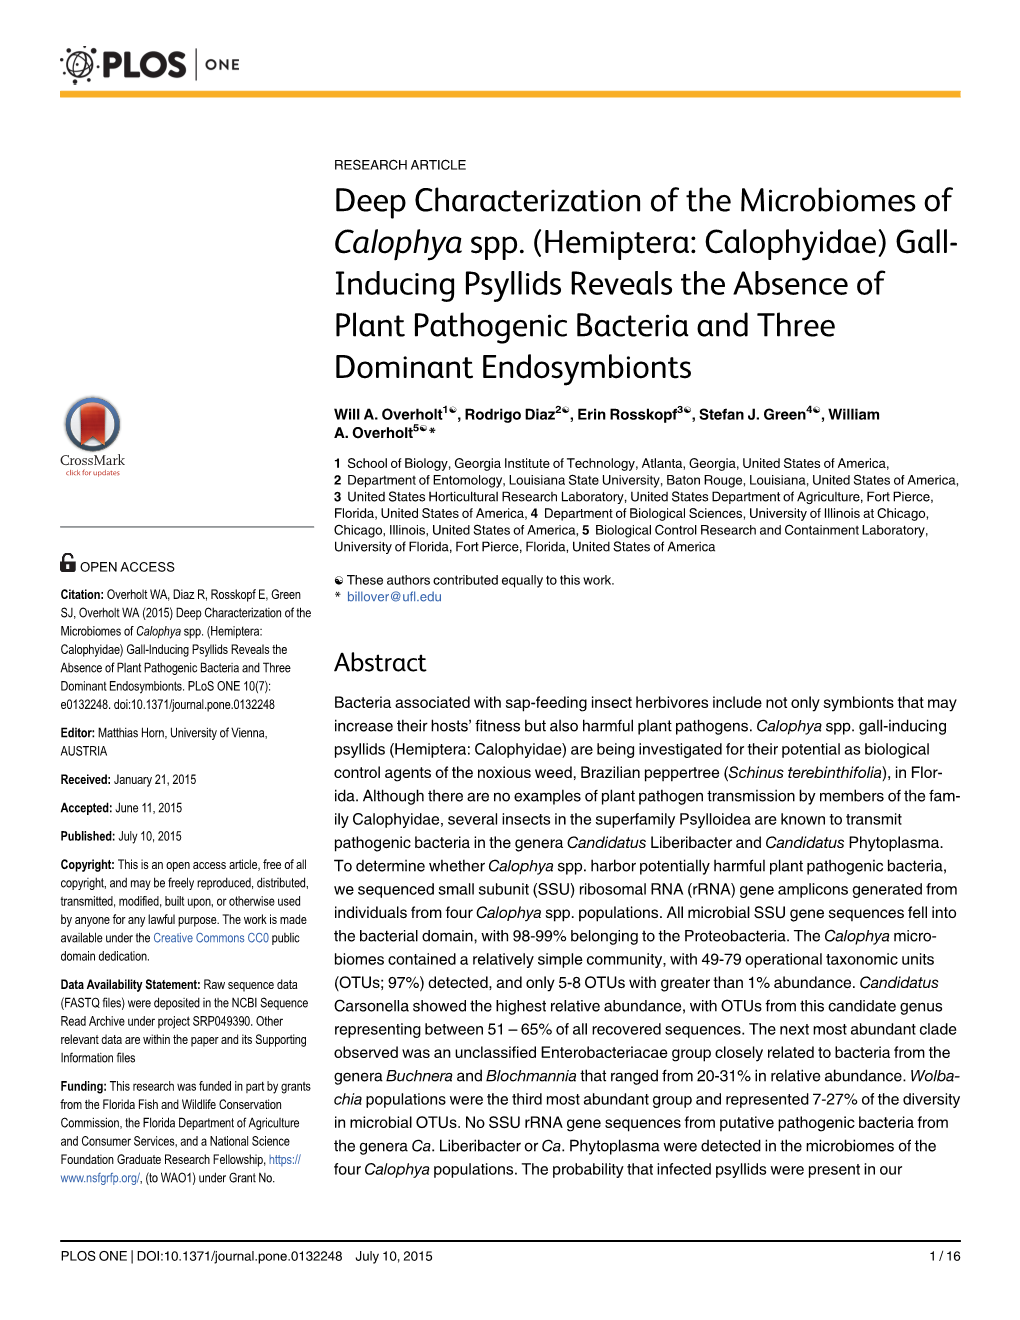 Deep Characterization of the Microbiomes of Calophya Spp